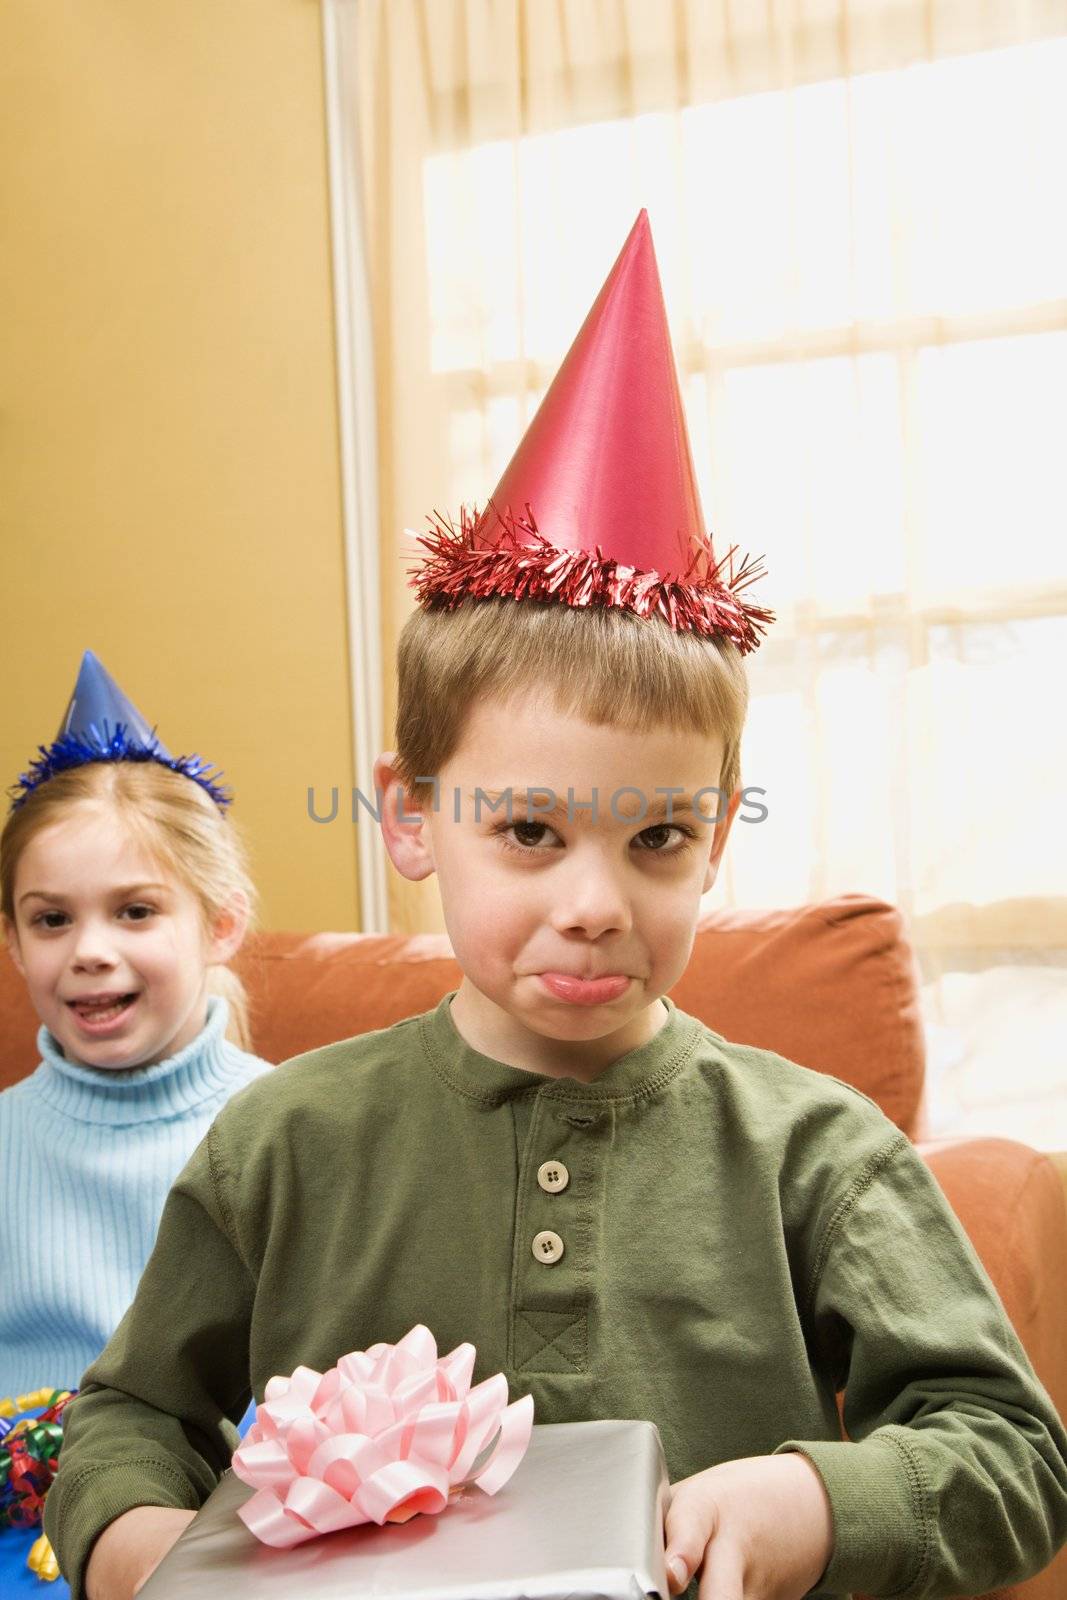 Caucasian boy wearing party hat pouting and looking at viewer.